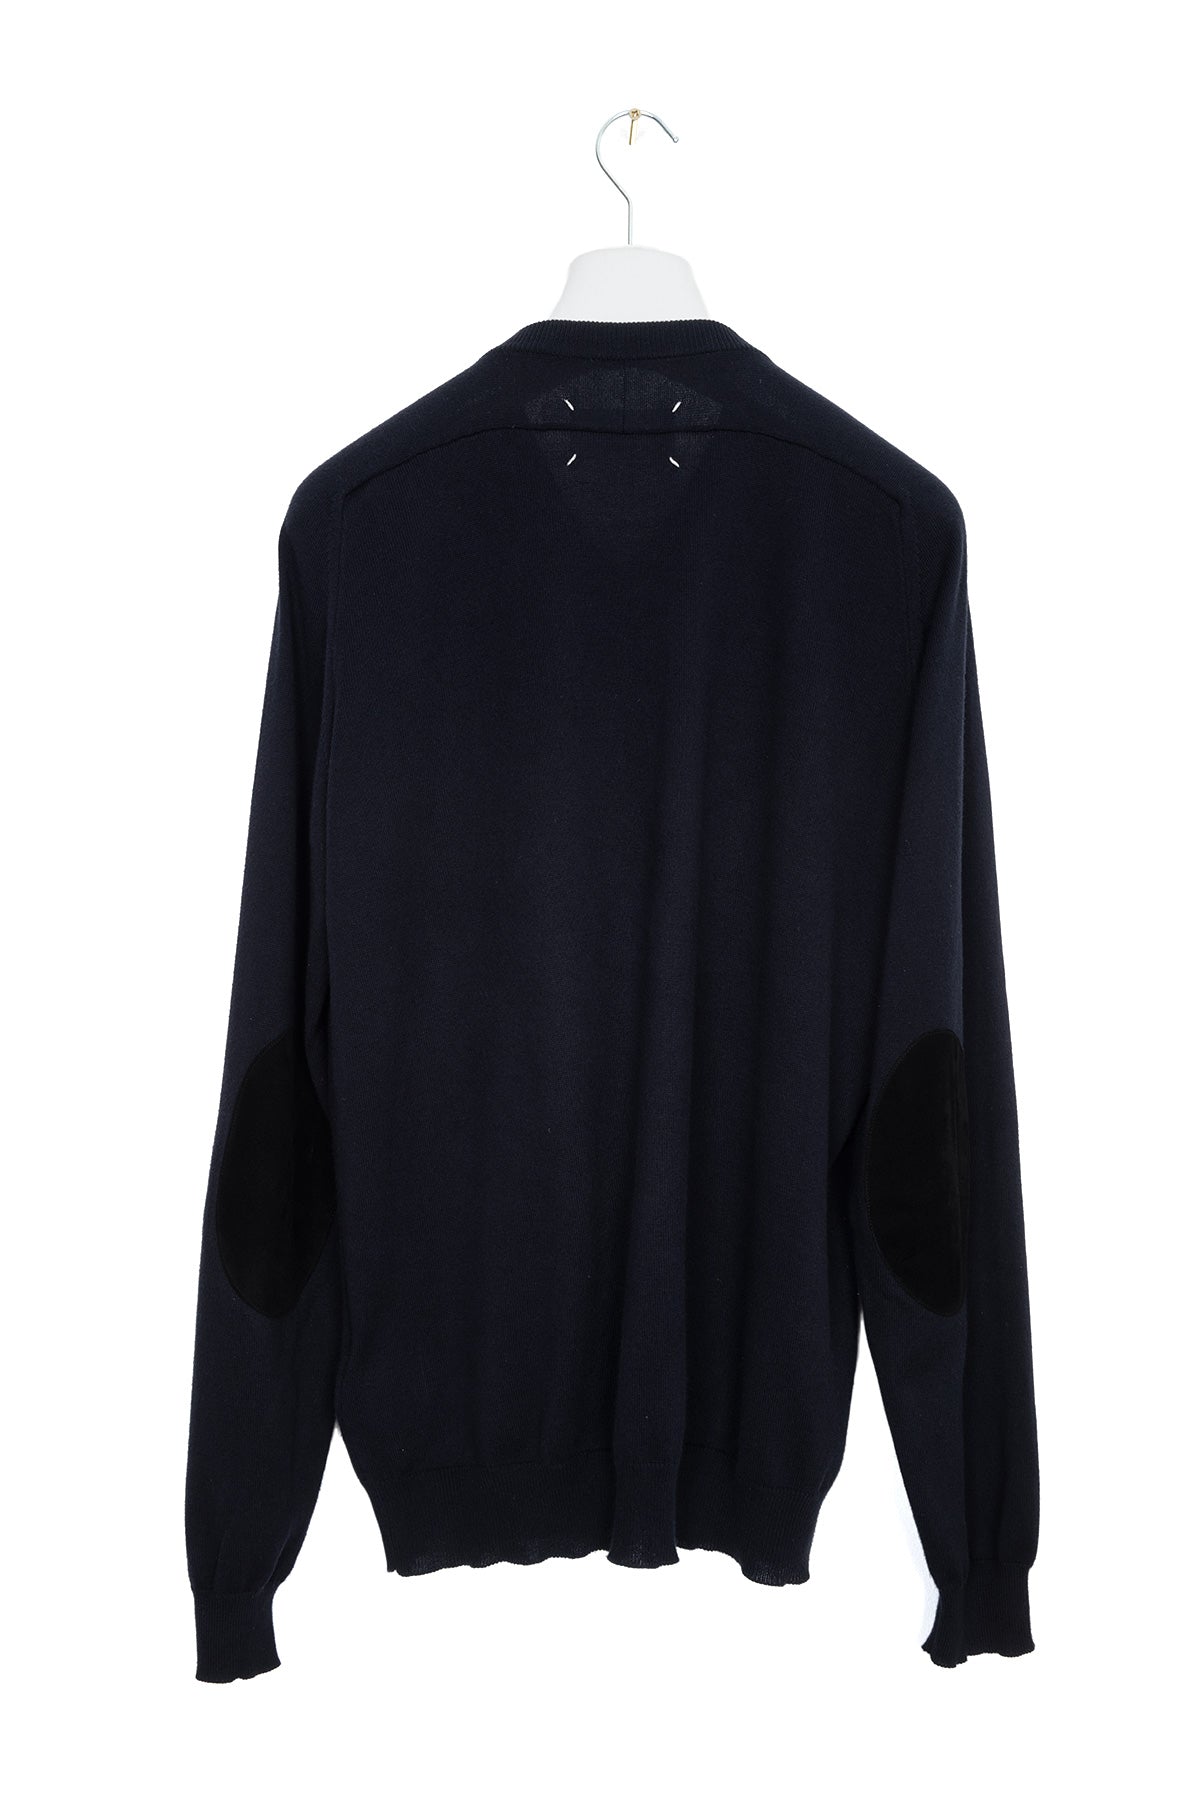 2006 S/S HAMMER SLEEVE V-NECK SWEATER WITH SUEDE ELBOW PATCH